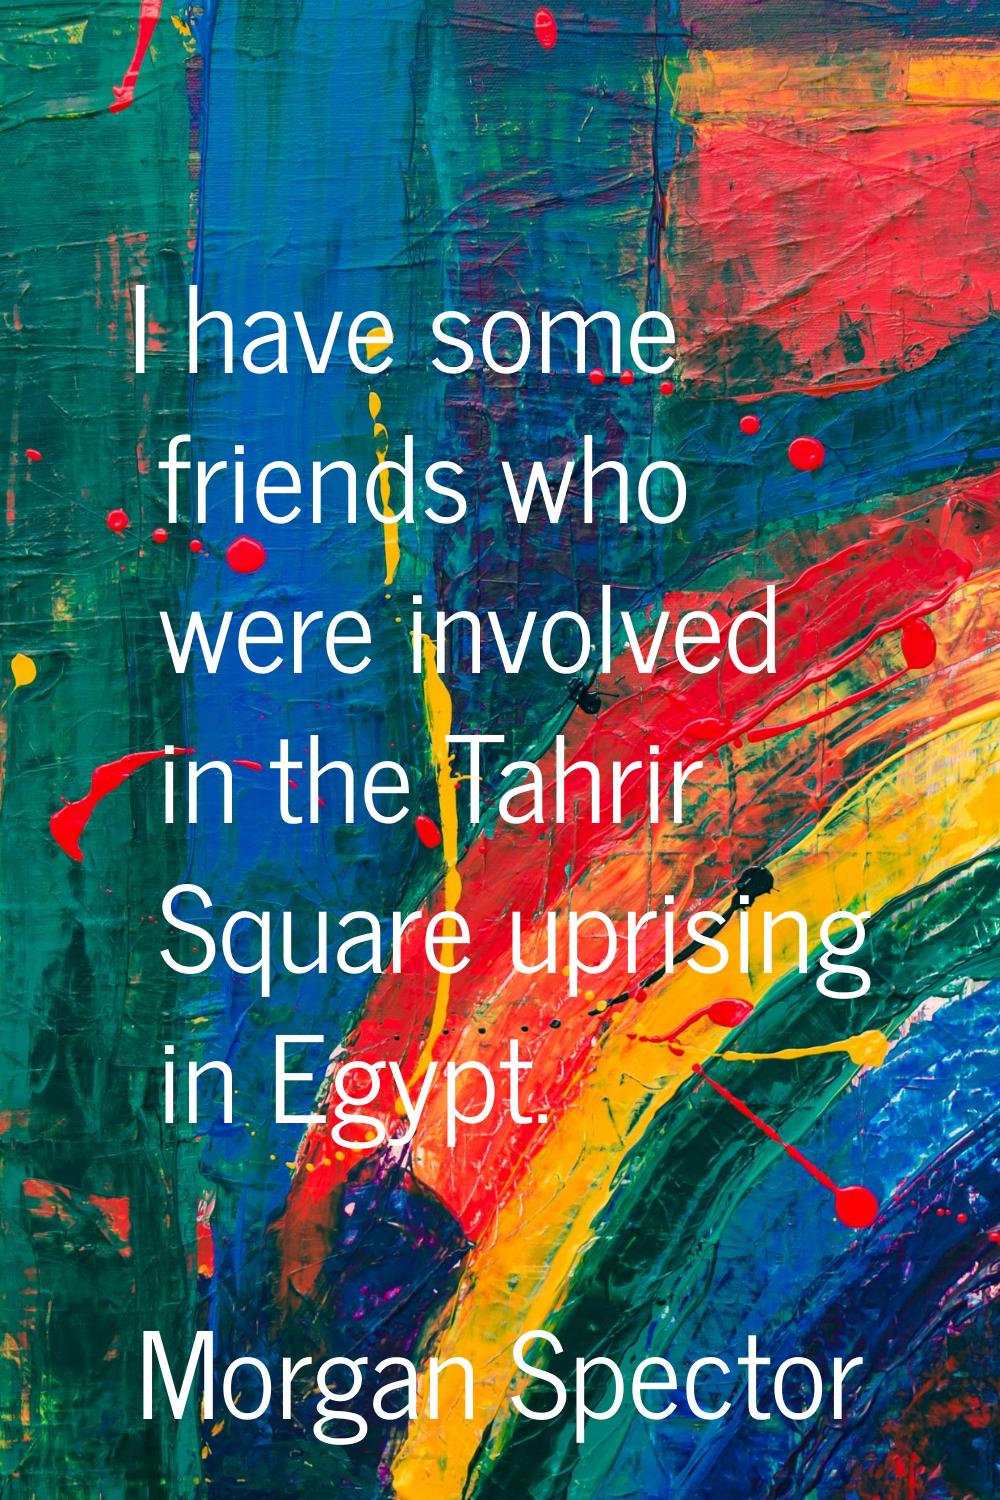 I have some friends who were involved in the Tahrir Square uprising in Egypt.